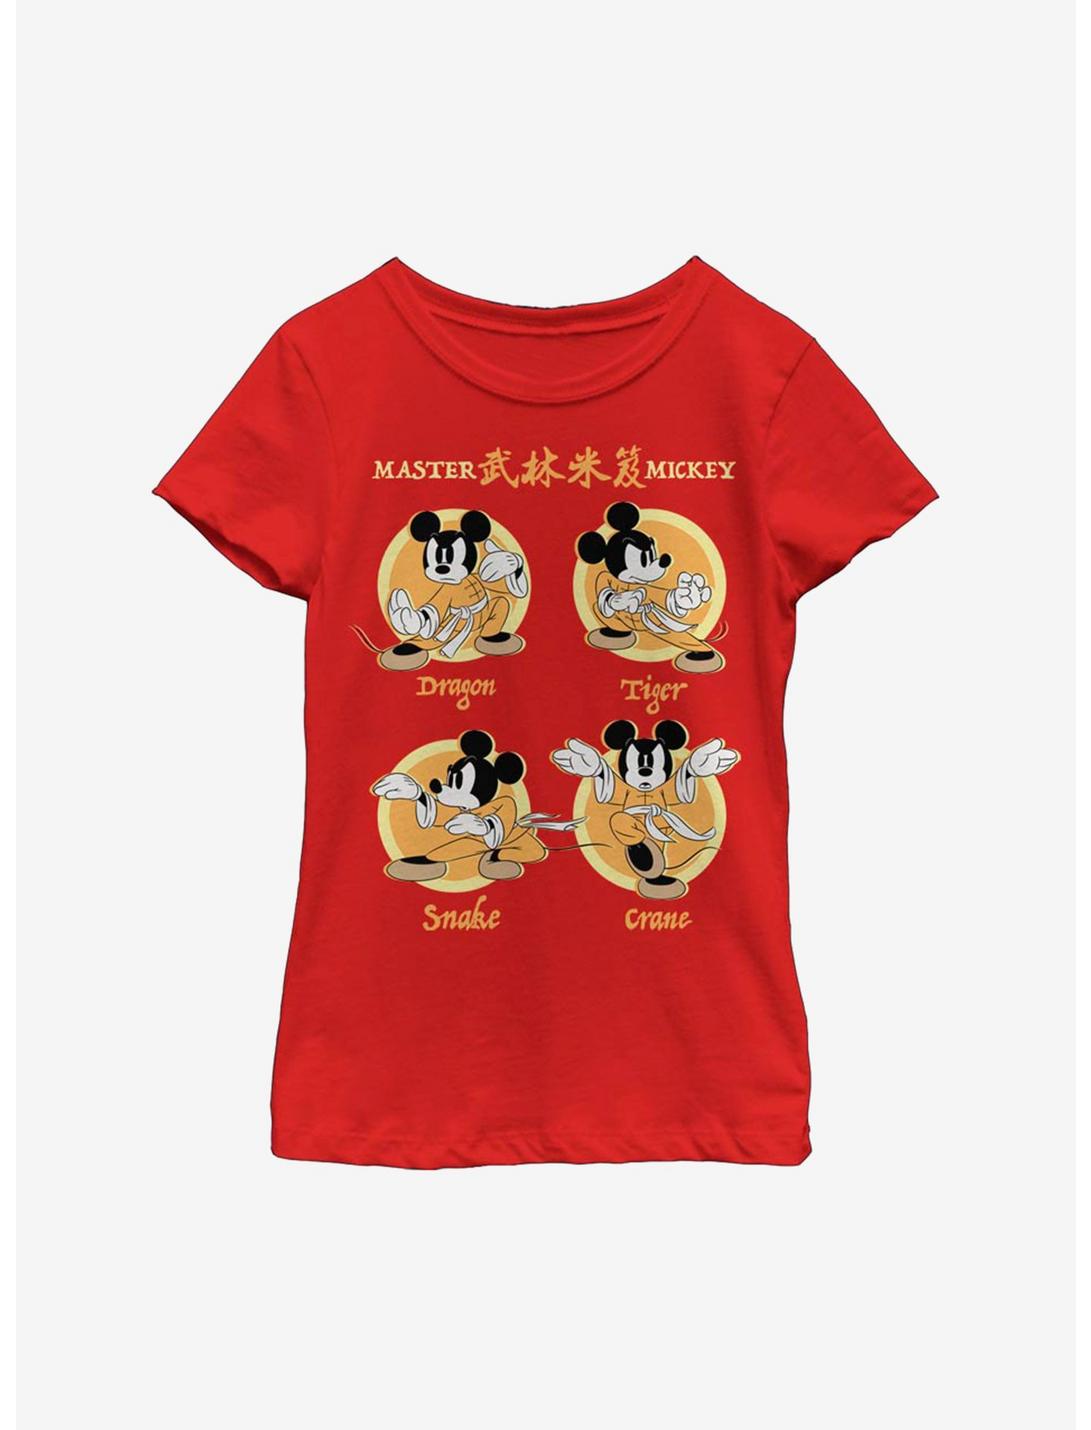 Disney Mickey Mouse Master Mickey Moves Youth Girls T-Shirt, RED, hi-res